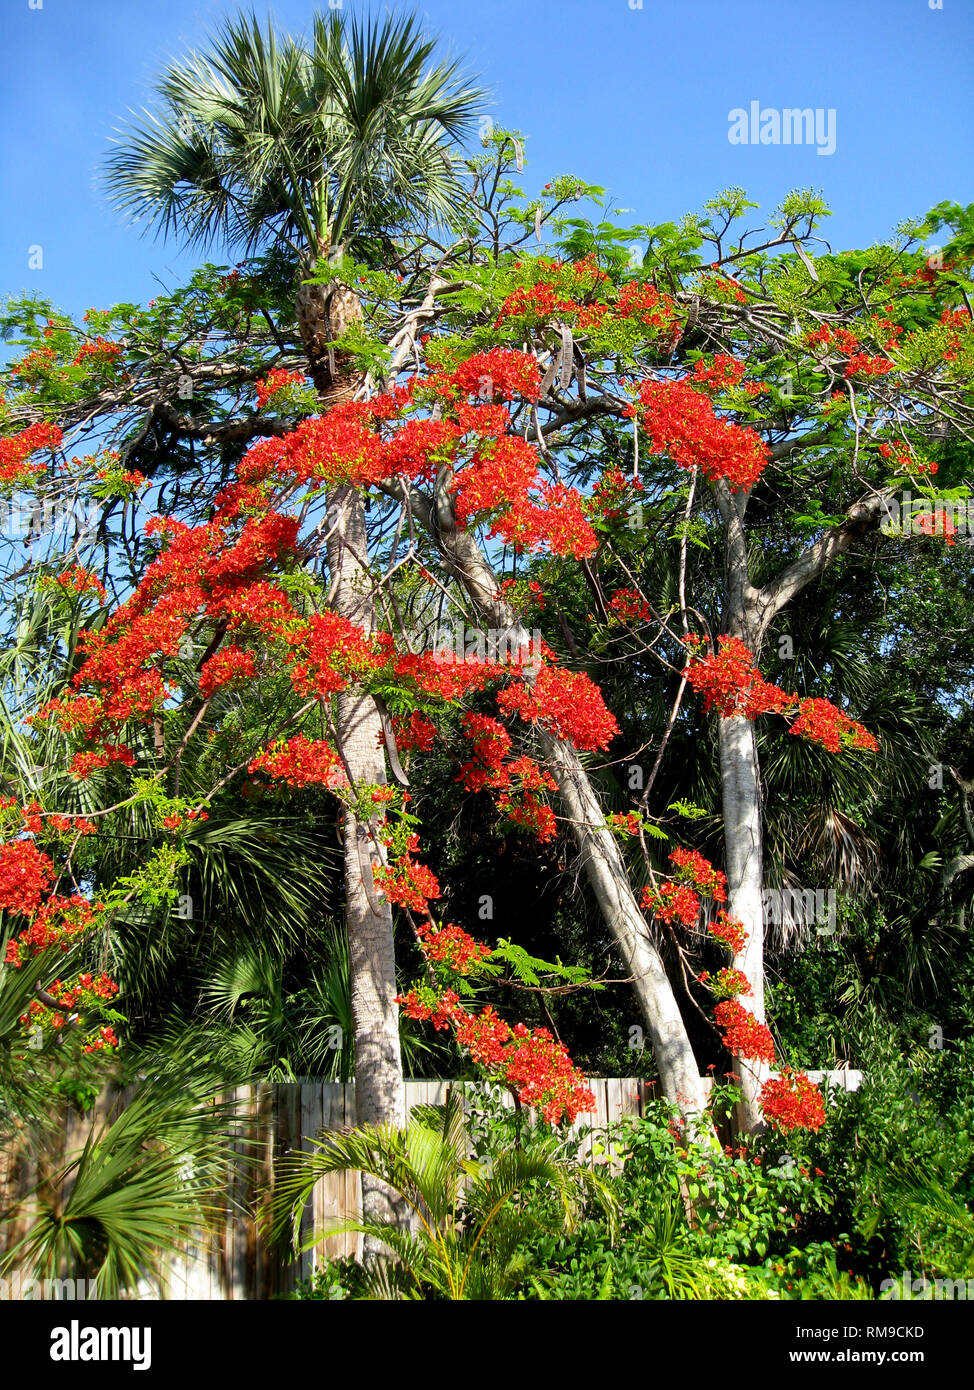 Clusters of scarlet flowers blossom in springtime on showy Royal Poinciana trees (Delonix regia) in southern Florida, USA. This deciduous member of the bean family also is known as the Flame Tree and Flamboyant Tree. It also is identified by lacy green fern-like leaves and long brown seed pods. Stock Photo